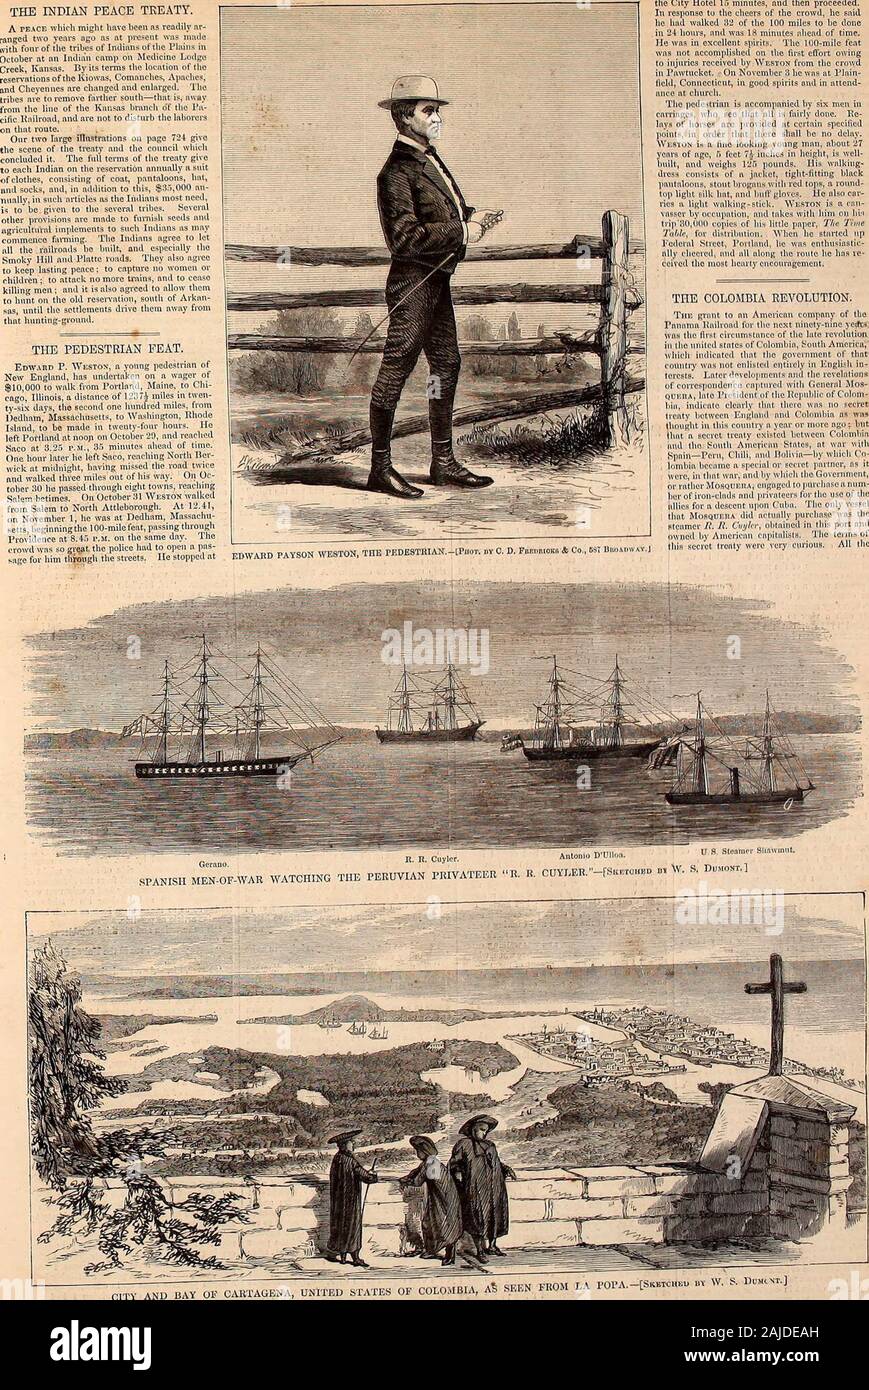 Harper's weekly . HARPERS WEEKLY. THE INDIAN PEACE TREATY.. STATES OF COLOMBIA, A$ SEEN FROM LA POPA.-poM*» « nARPElfS WEEKLY. [N0VEMDF.It 16, IS Stock Photo